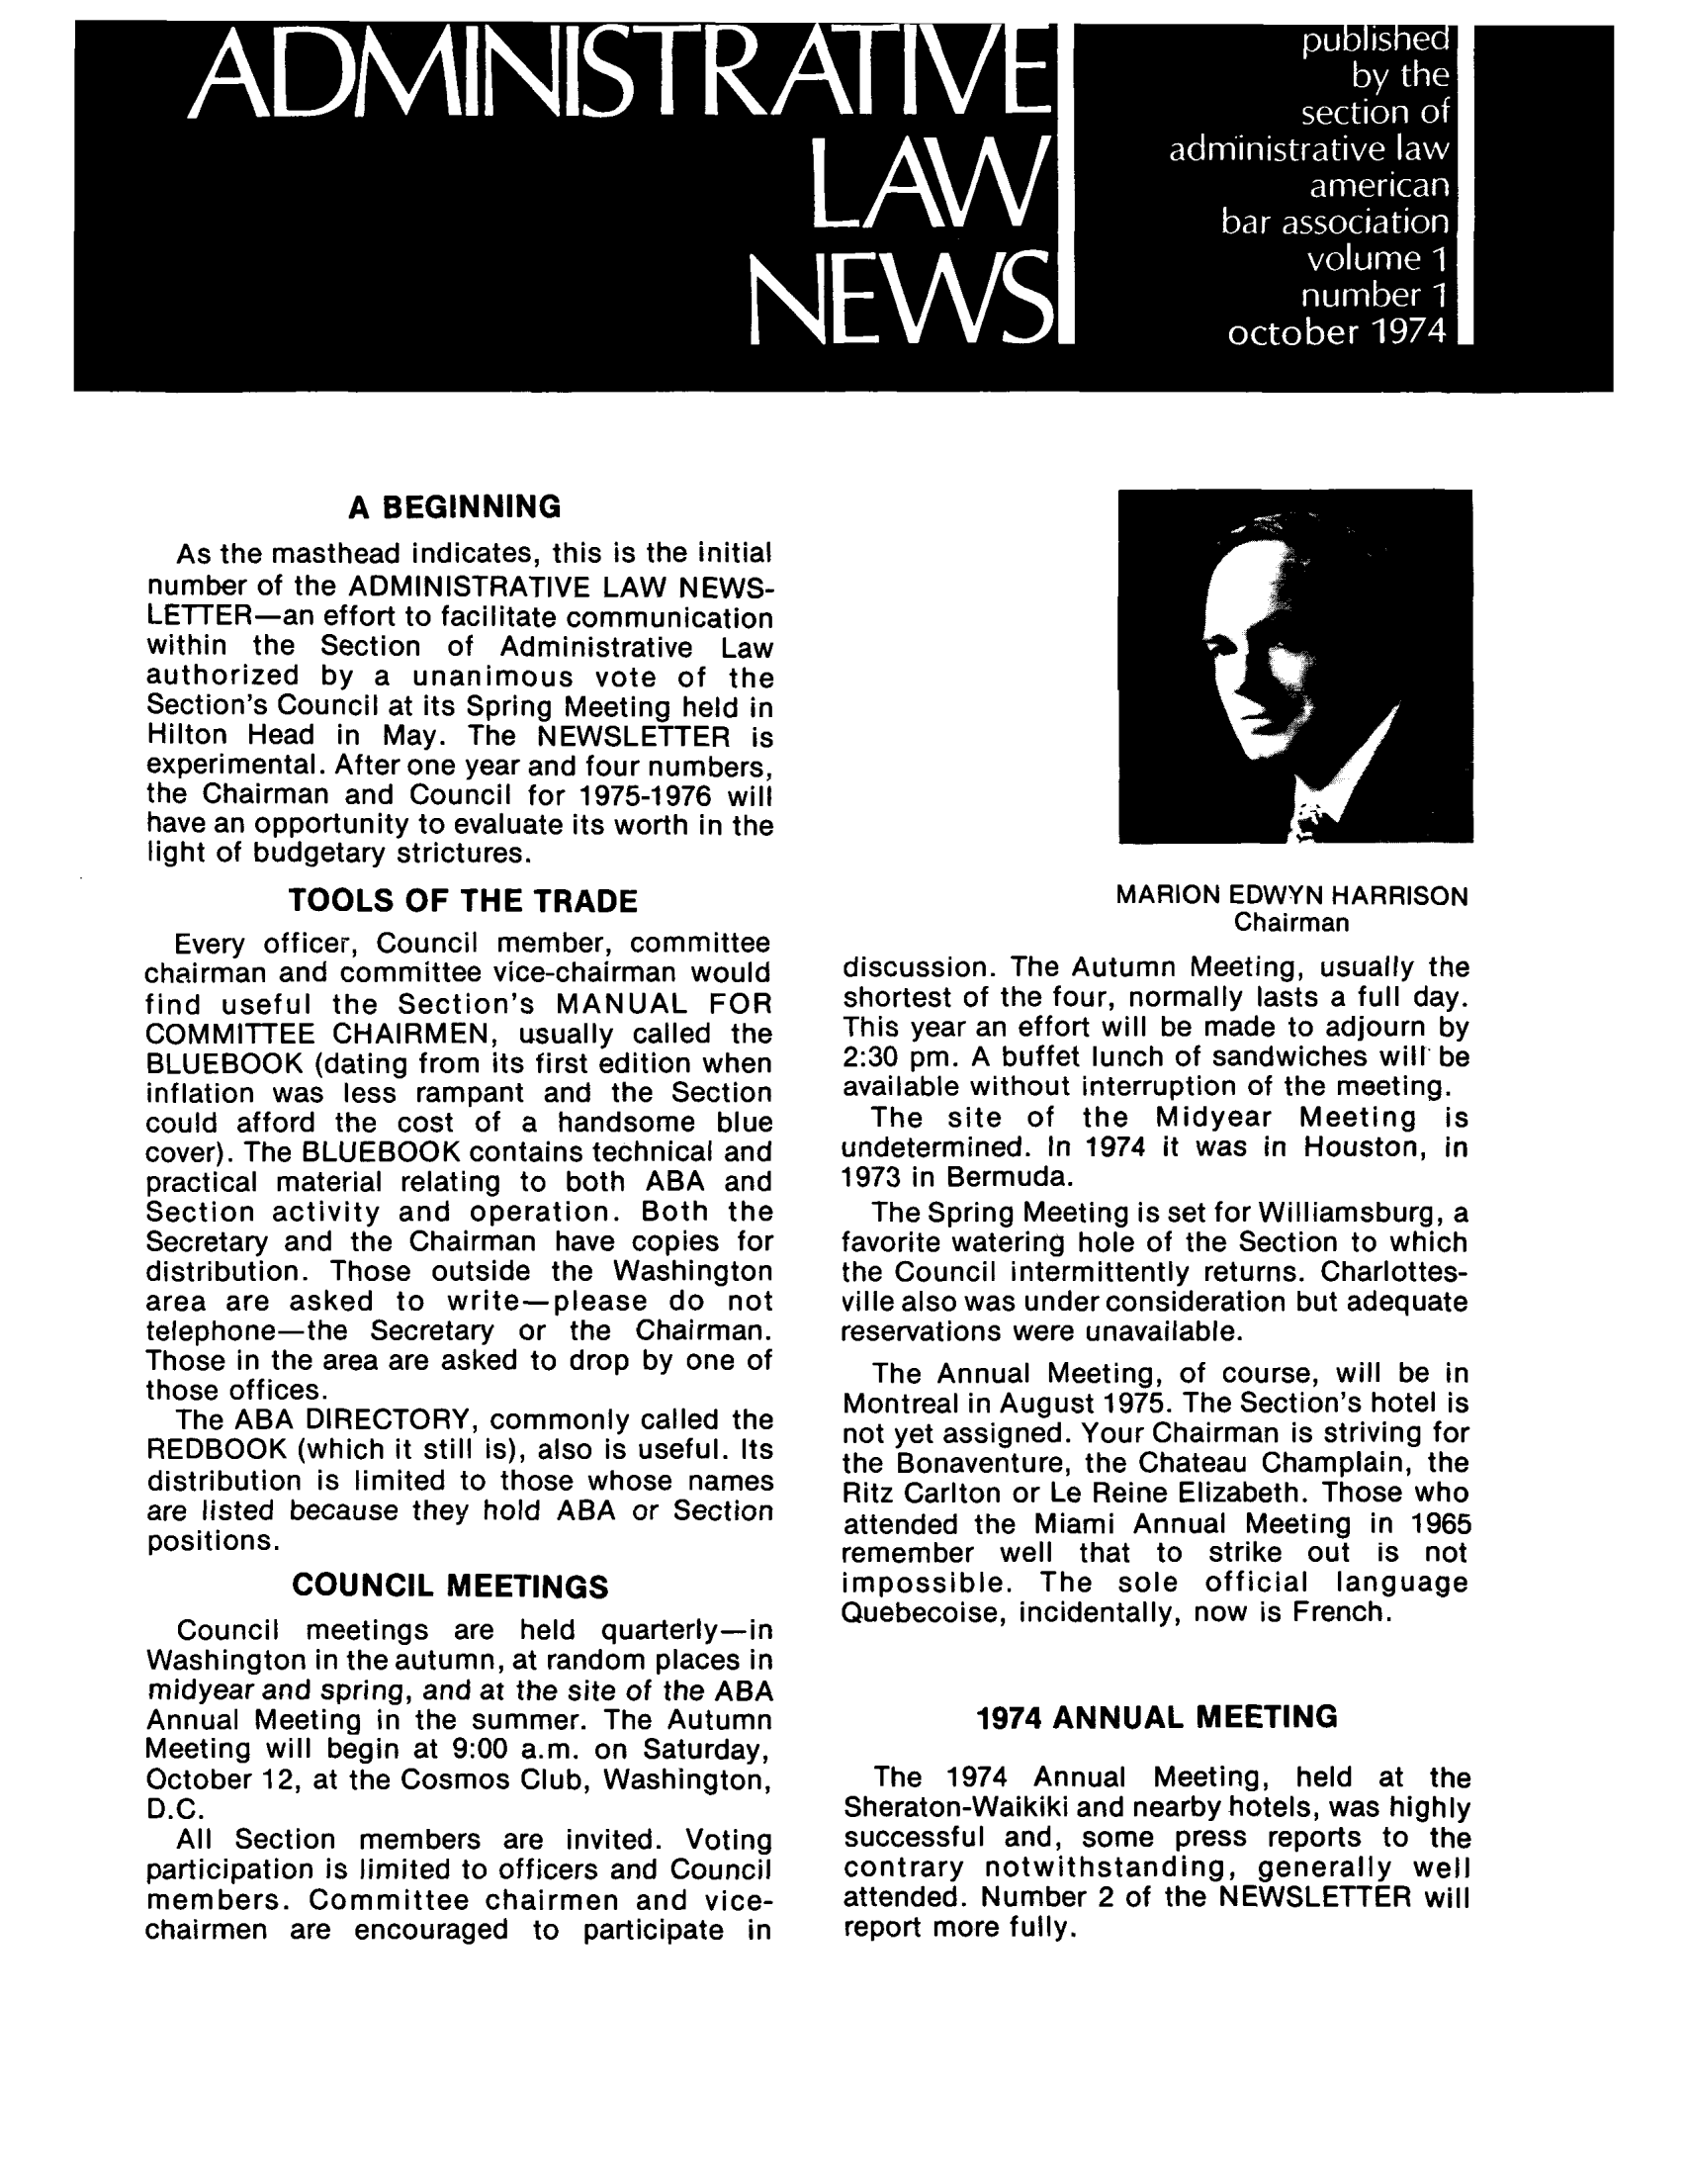 handle is hein.journals/admreln1 and id is 1 raw text is: A BEGINNING
As the masthead indicates, this is the initial
number of the ADMINISTRATIVE LAW NEWS-
LETTER-an effort to facilitate communication
within the Section of Administrative Law
authorized by a unanimous vote of the
Section's Council at its Spring Meeting held in
Hilton Head in May. The NEWSLETTER is
experimental. After one year and four numbers,
the Chairman and Council for 1975-1976 will
have an opportunity to evaluate its worth in the
light of budgetary strictures.
TOOLS OF THE TRADE
Every officer, Council member, committee
chairman and committee vice-chairman would
find useful the Section's MANUAL FOR
COMMITTEE CHAIRMEN, usually called the
BLUEBOOK (dating from its first edition when
inflation was less rampant and the Section
could afford the cost of a handsome blue
cover). The BLUEBOOK contains technical and
practical material relating to both ABA and
Section activity and operation. Both the
Secretary and the Chairman have copies for
distribution. Those outside the Washington
area are asked to write-please do not
telephone-the Secretary or the Chairman.
Those in the area are asked to drop by one of
those offices.
The ABA DIRECTORY, commonly called the
REDBOOK (which it still is), also is useful. Its
distribution is limited to those whose names
are listed because they hold ABA or Section
positions.
COUNCIL MEETINGS
Council meetings are held quarterly-in
Washington in the autumn, at random places in
midyear and spring, and at the site of the ABA
Annual Meeting in the summer. The Autumn
Meeting will begin at 9:00 a.m. on Saturday,
October 12, at the Cosmos Club, Washington,
D.C.
All Section members are invited. Voting
participation is limited to officers and Council
members. Committee chairmen and vice-
chairmen are encouraged to participate in

MARION EDWYN HARRISON
Chairman
discussion. The Autumn Meeting, usually the
shortest of the four, normally lasts a full day.
This year an effort will be made to adjourn by
2:30 pm. A buffet lunch of sandwiches will be
available without interruption of the meeting.
The site of the Midyear Meeting is
undetermined. In 1974 it was in Houston, in
1973 in Bermuda.
The Spring Meeting is set for Williamsburg, a
favorite watering hole of the Section to which
the Council intermittently returns. Charlottes-
ville also was under consideration but adequate
reservations were unavailable.
The Annual Meeting, of course, will be in
Montreal in August 1975. The Section's hotel is
not yet assigned. Your Chairman is striving for
the Bonaventure, the Chateau Champlain, the
Ritz Carlton or Le Reine Elizabeth. Those who
attended the Miami Annual Meeting in 1965
remember well that to strike out is not
impossible. The sole official language
Quebecoise, incidentally, now is French.
1974 ANNUAL MEETING
The 1974 Annual Meeting, held at the
Sheraton-Waikiki and nearby hotels, was highly
successful and, some press reports to the
contrary notwithstanding, generally well
attended. Number 2 of the NEWSLETTER will
report more fully.


